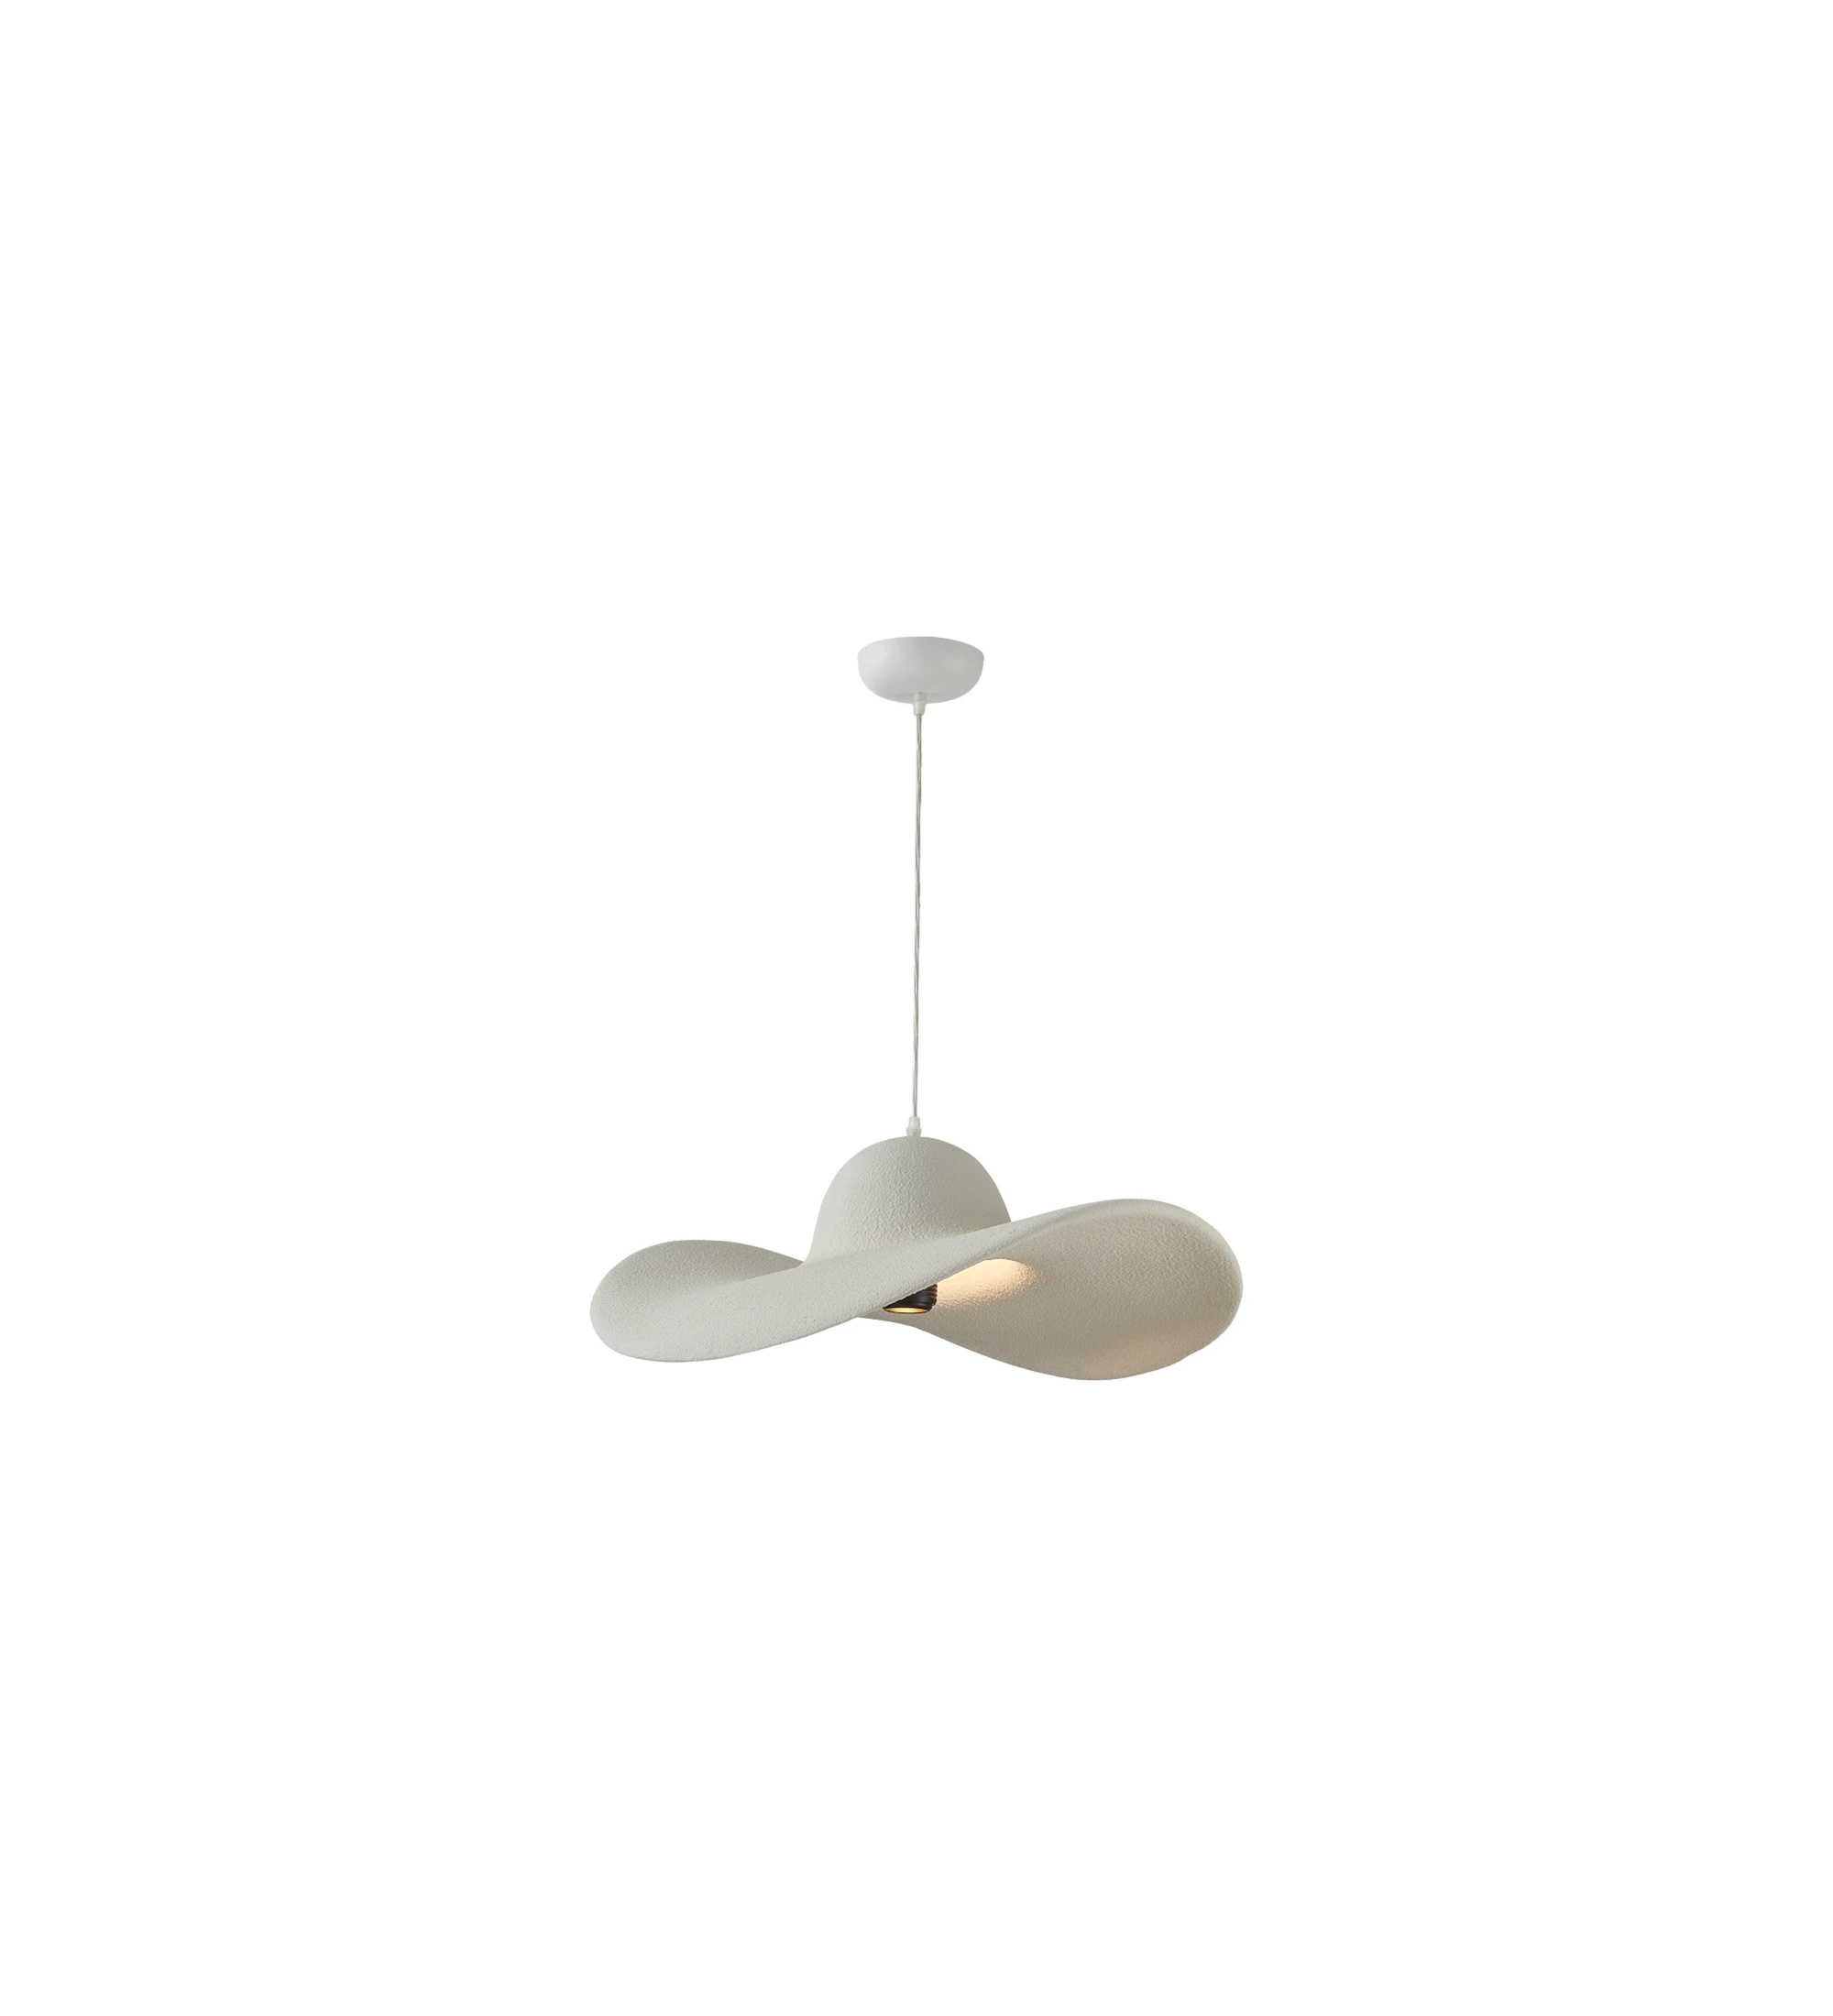  Suspension Lamp in ceramic with sanded texture and white tone.